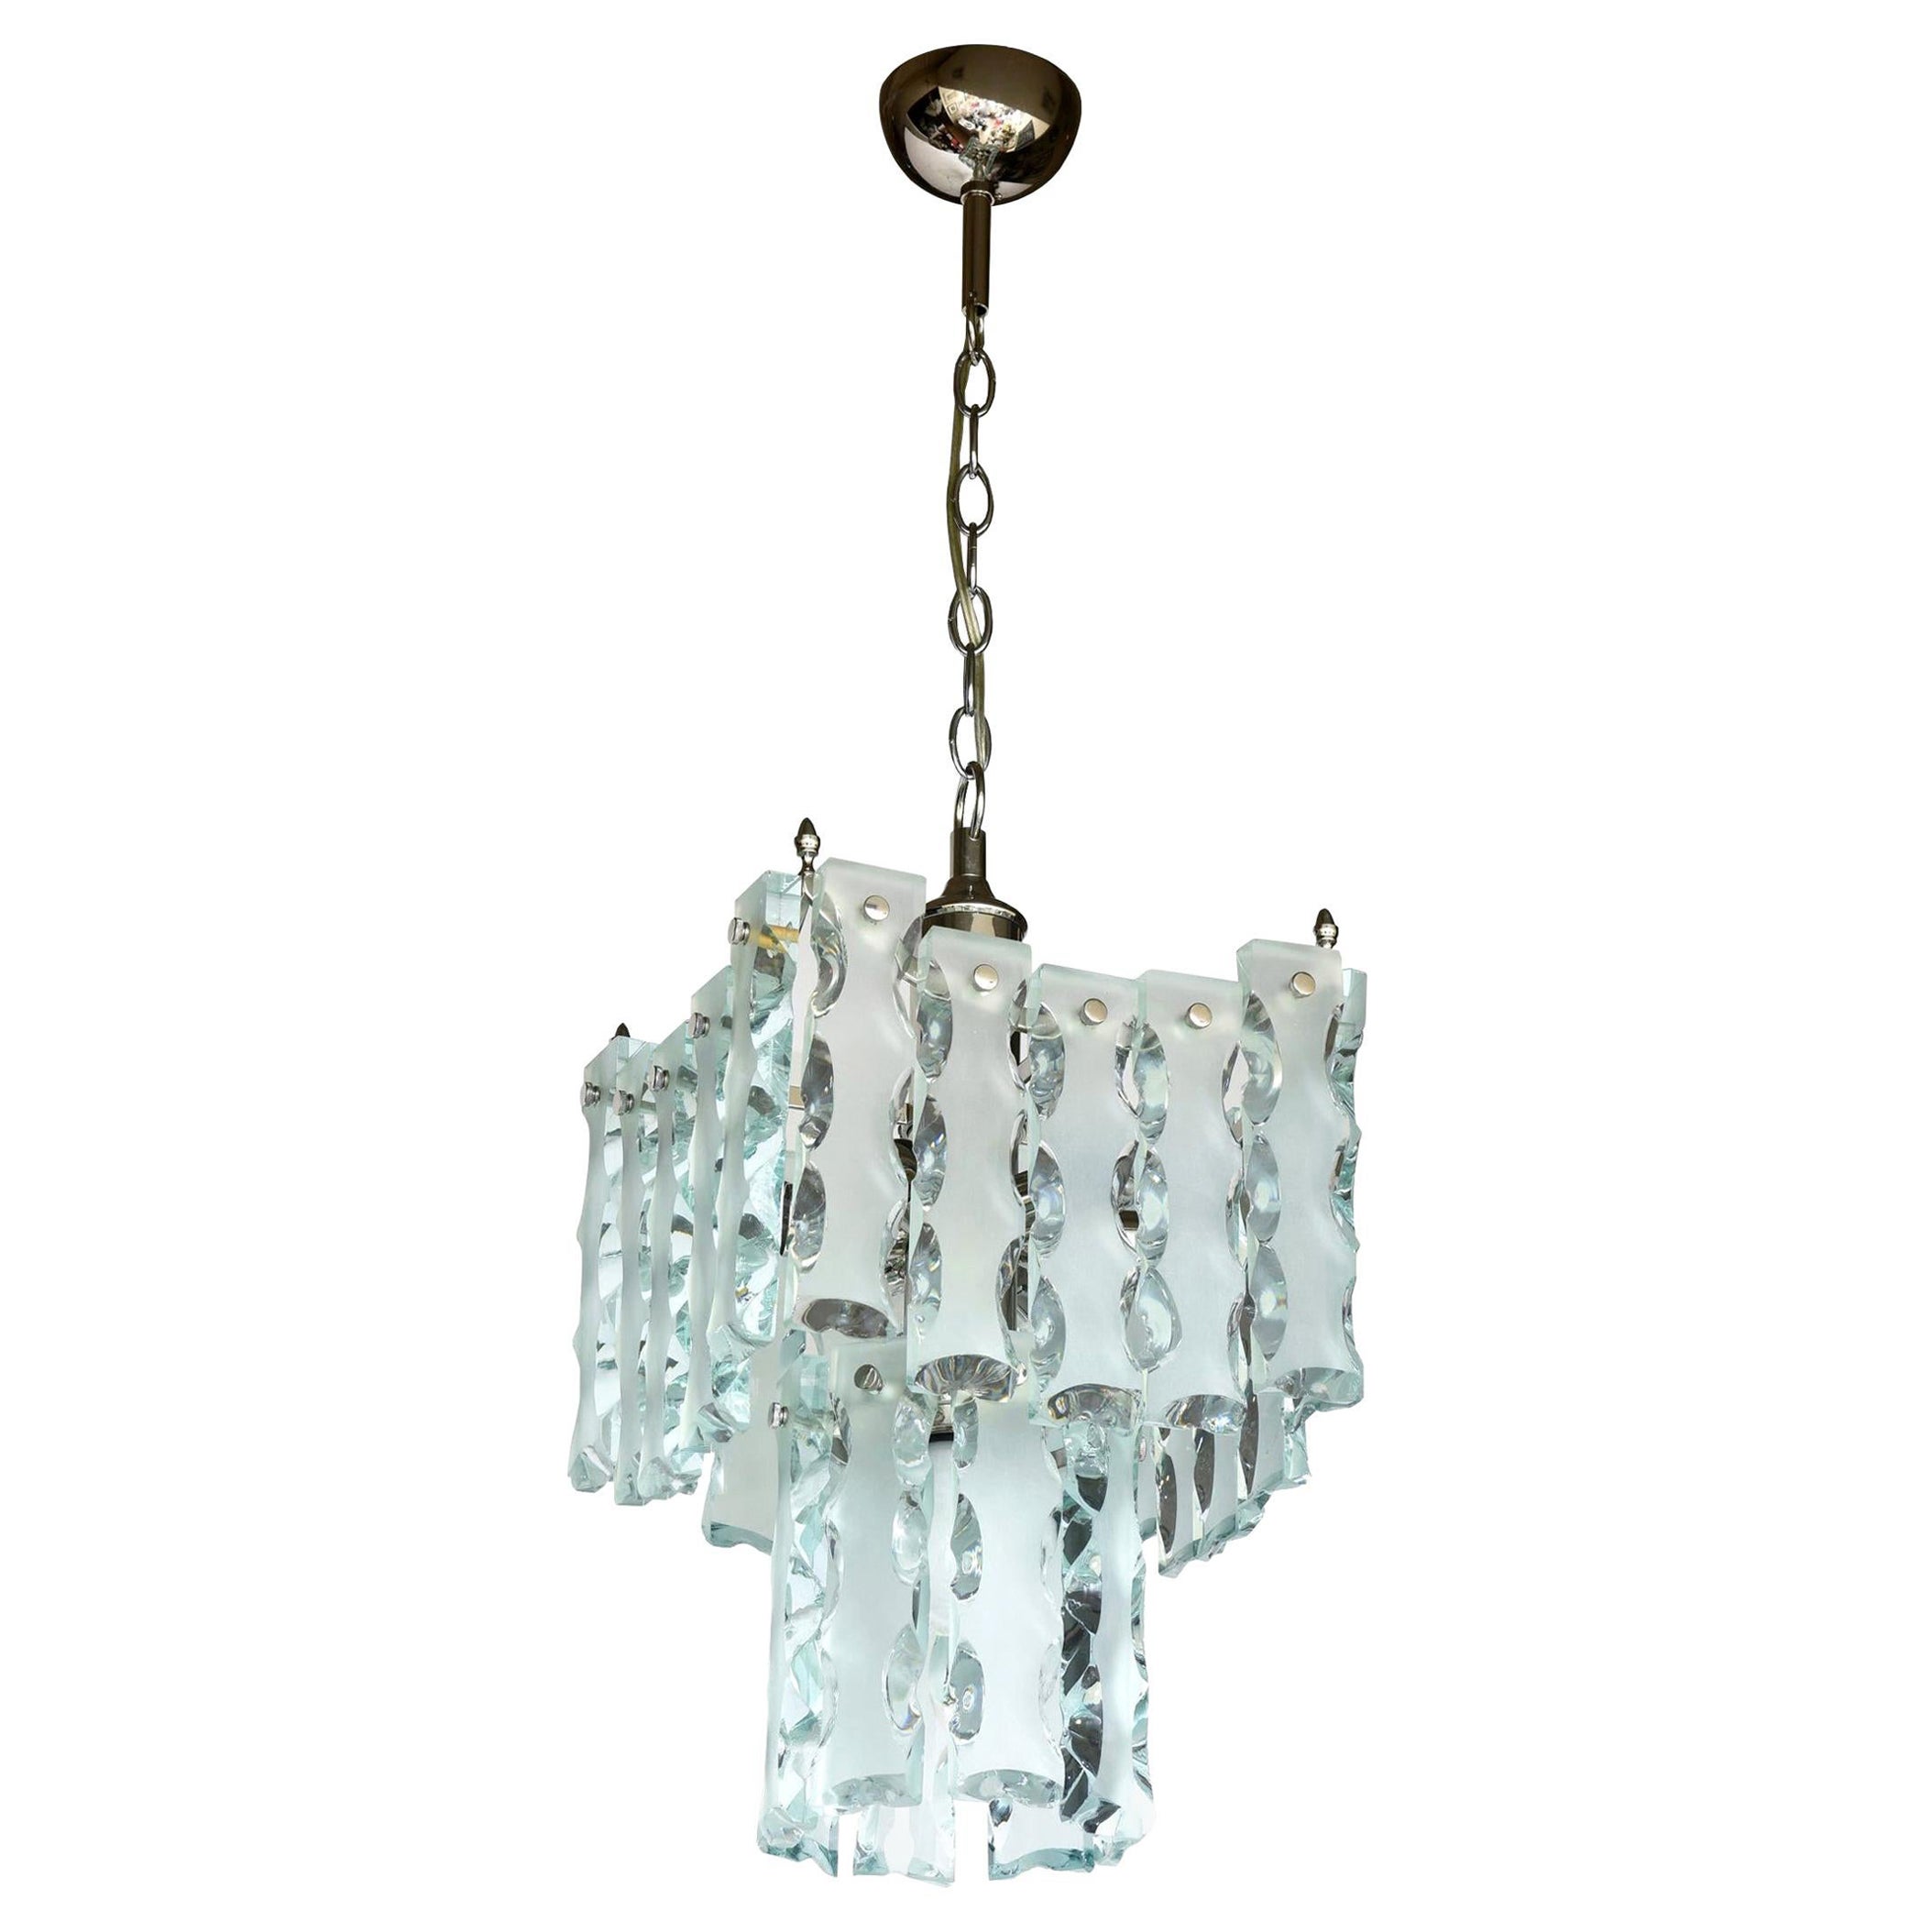  Murano Fontana Arte Attributed to Etched Glass Pendant Chandelier Vintage